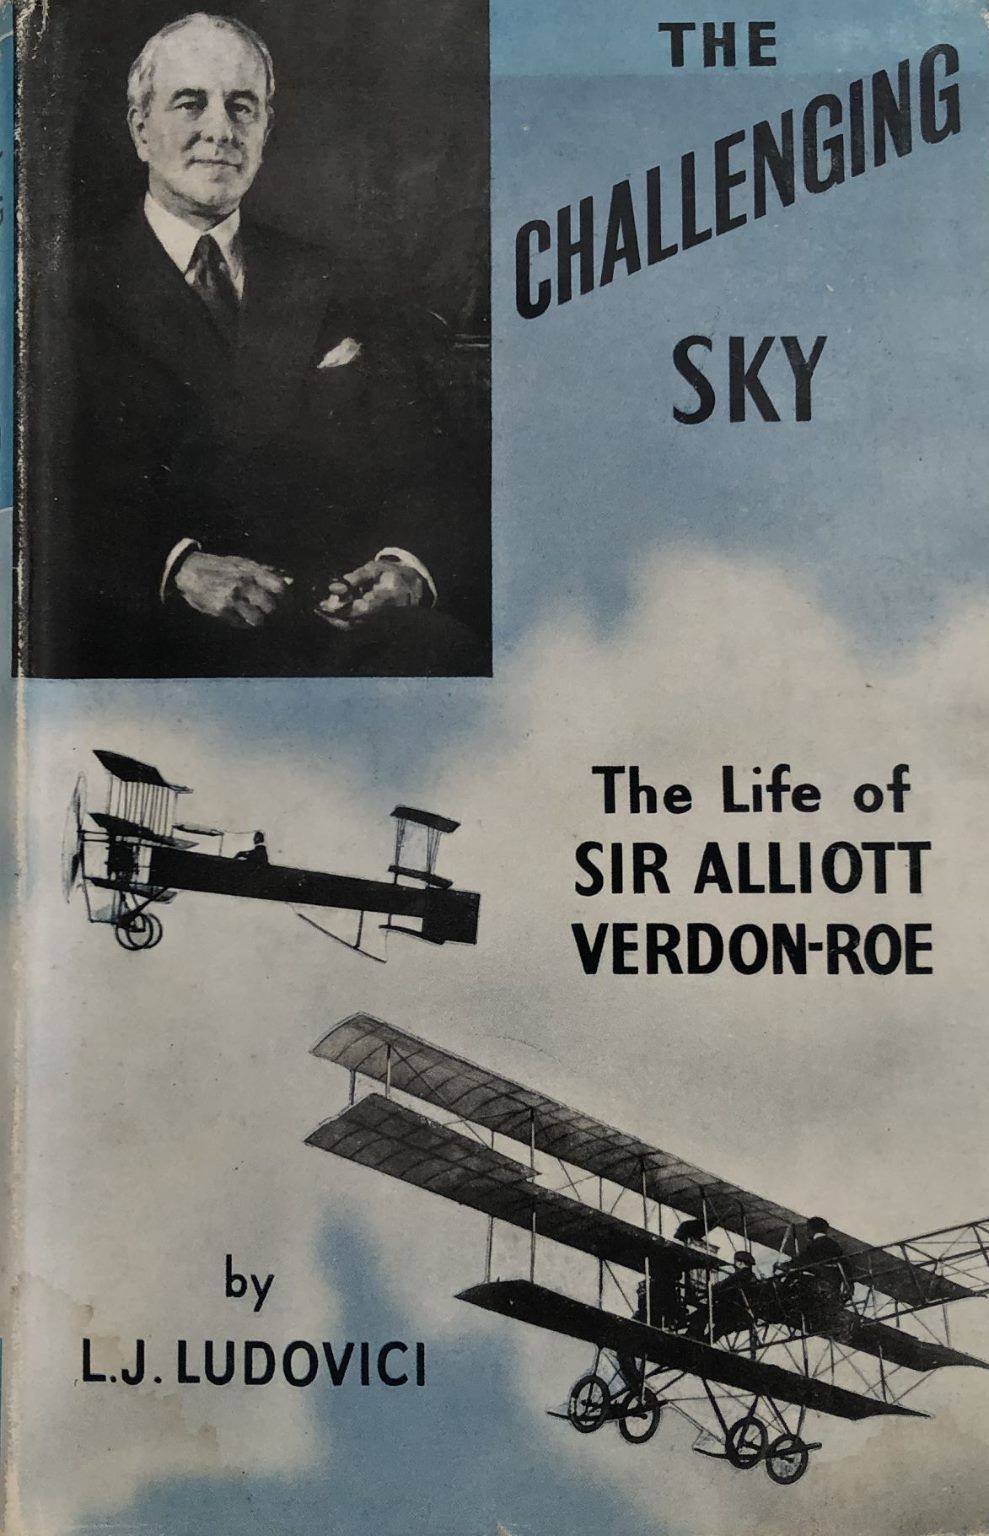 THE CHALLENGING SKY: The Life Of Sir Alliott Verdon-Roe